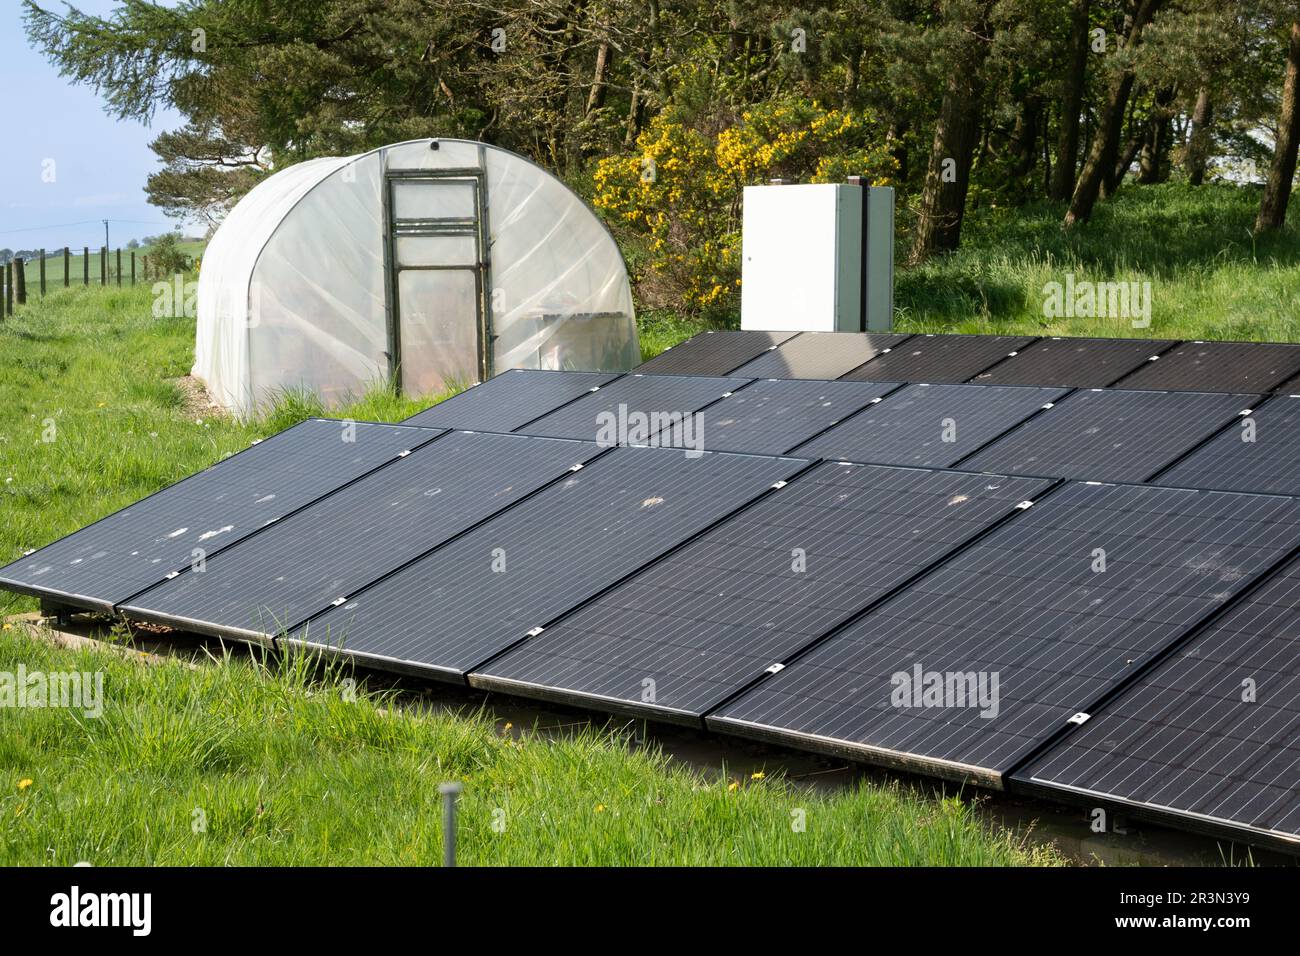 Line of ground level solar panels with polytunnel and trees in the background Stock Photo